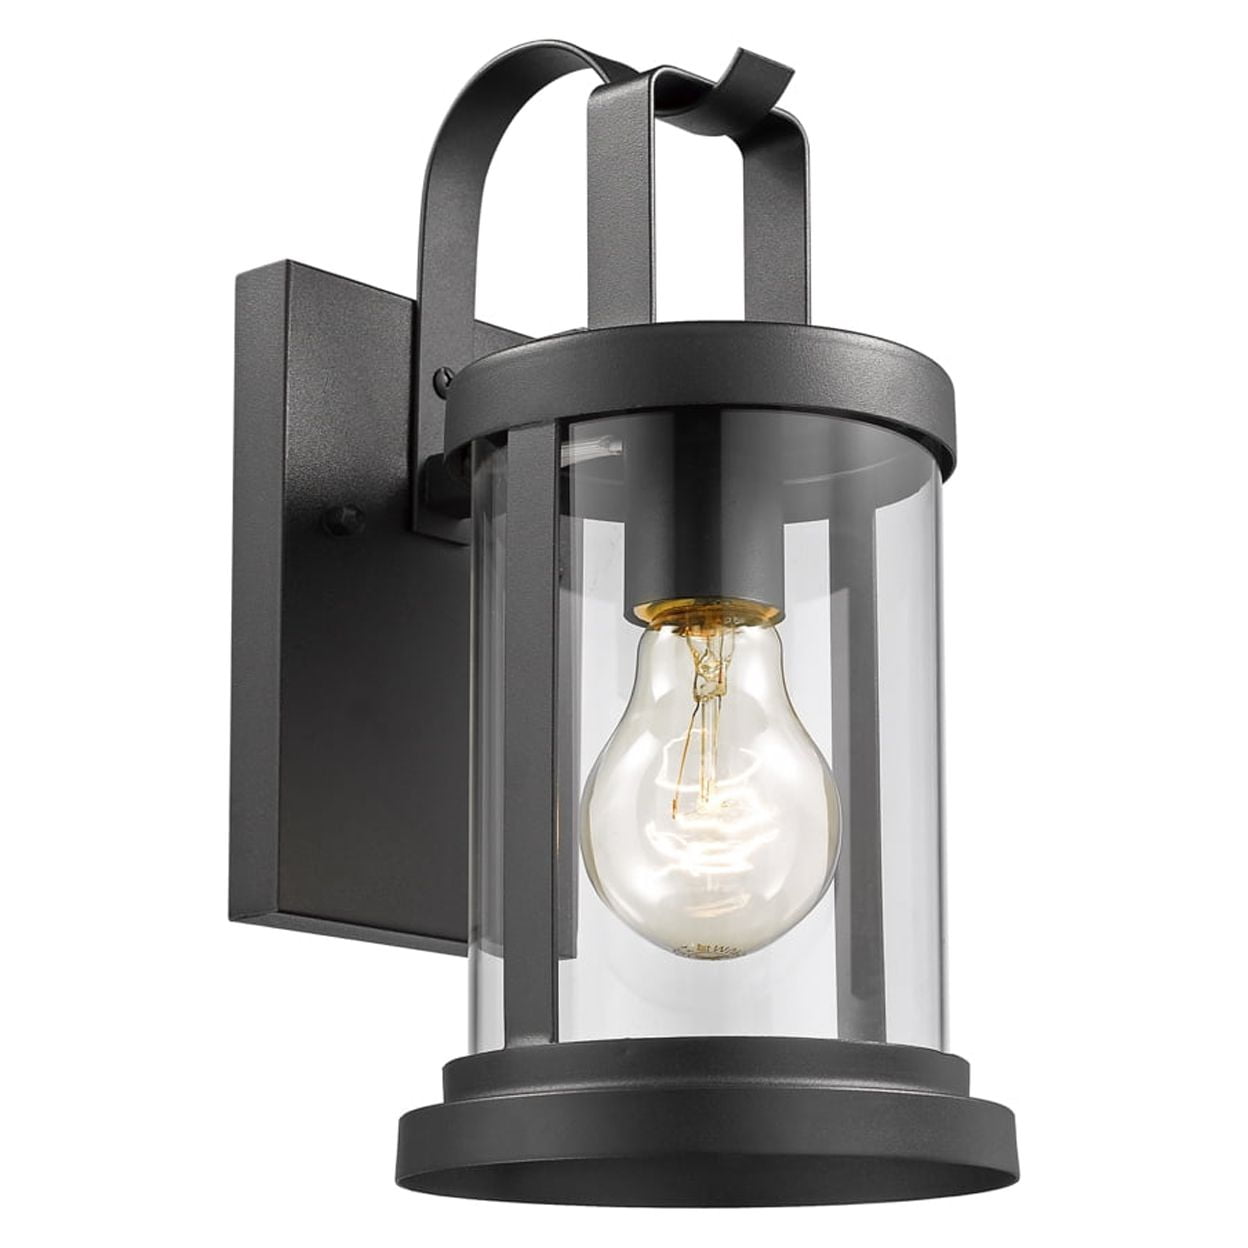 Picture of Chloe Lighting CH2S089BK11-OD1 Kash Transitional 1 Light Textured Black Outdoor Wall Sconce - 11 in.